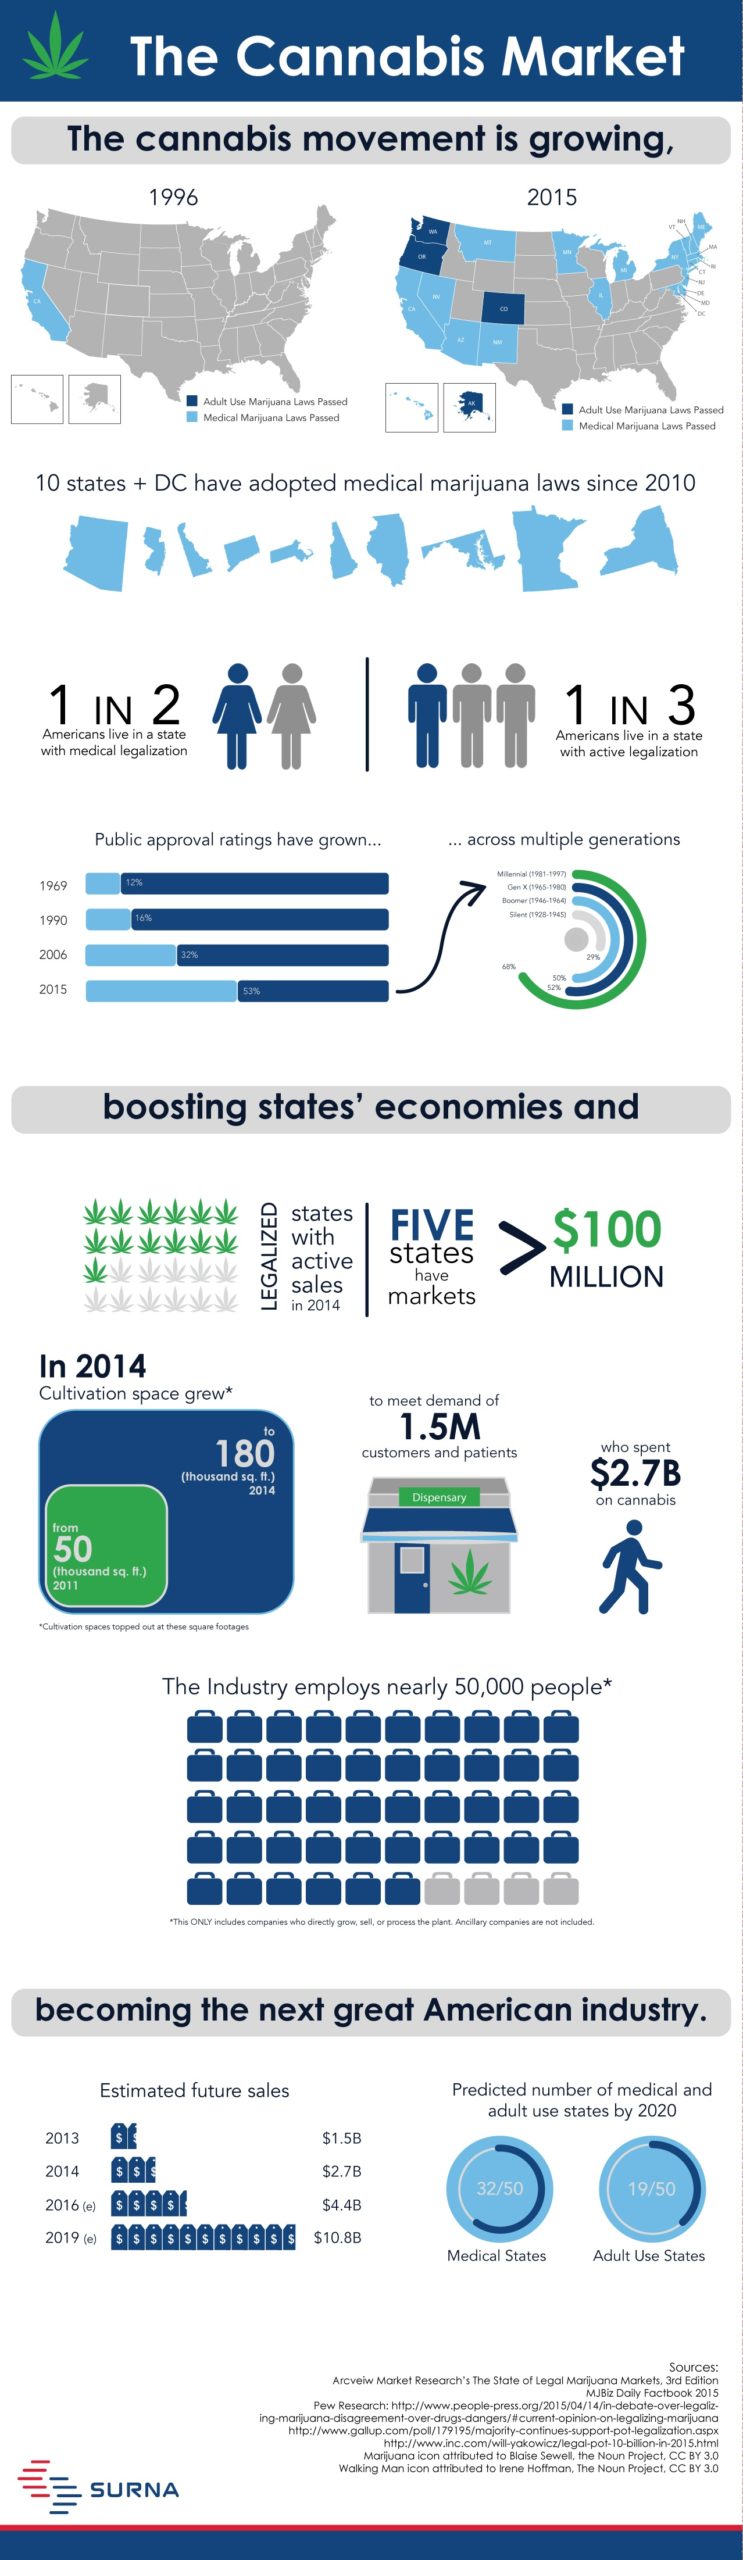 Infographic detailing the current state of the cannabis market